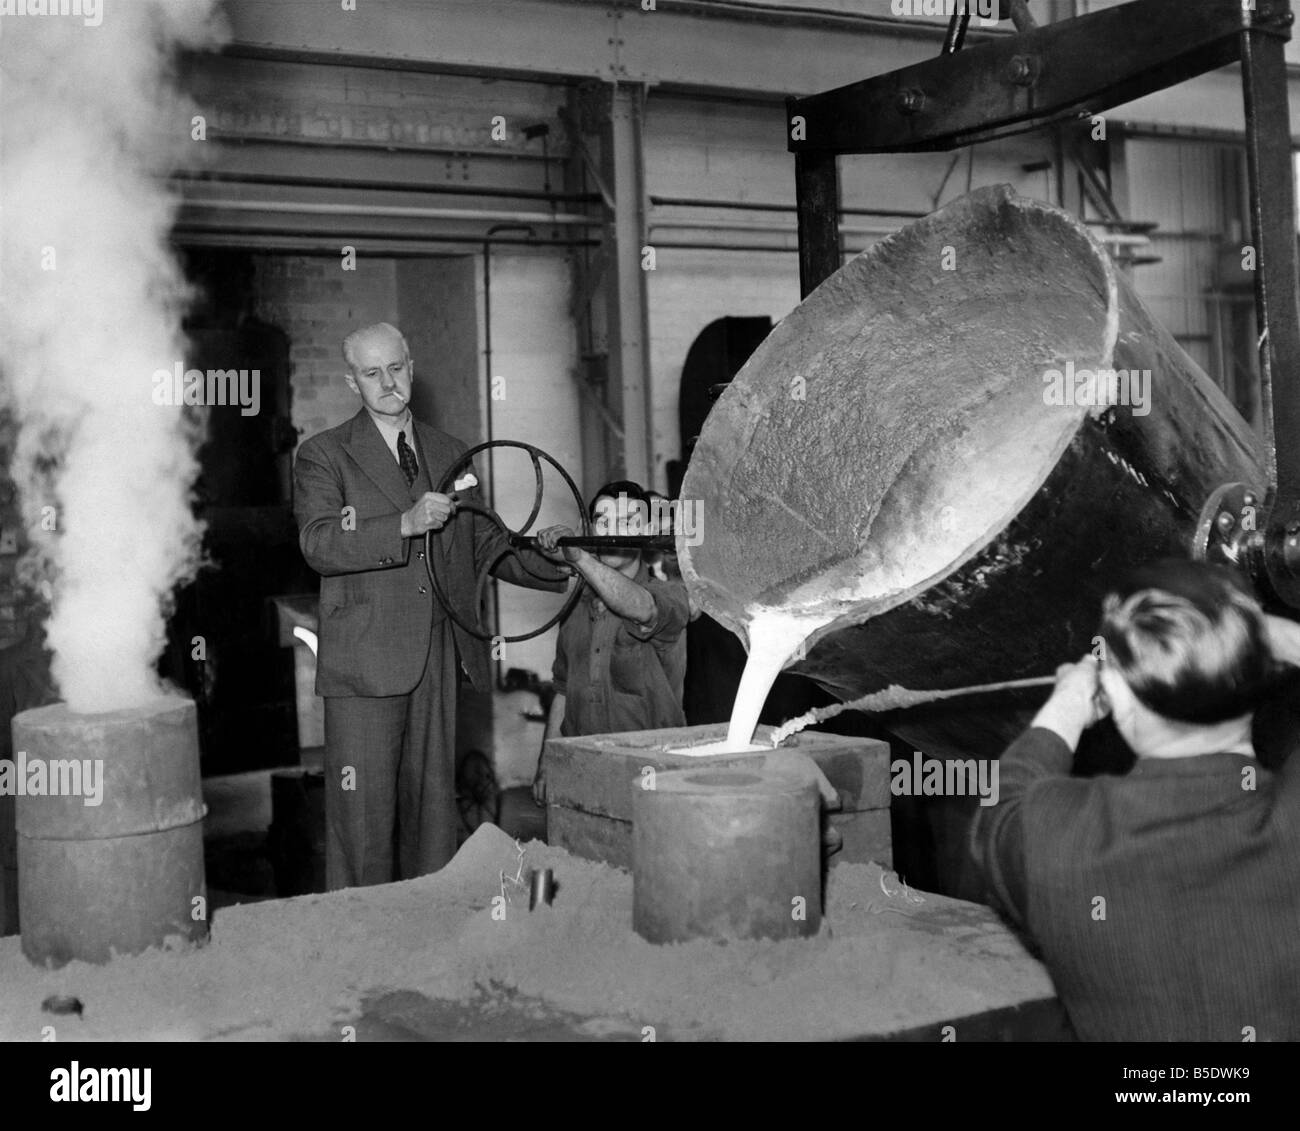 New Foundry opened ð Bredbury. A new ú35,000 foundry was officially opened at the Bredbury, Cheshire, works of William Crosland Stock Photo